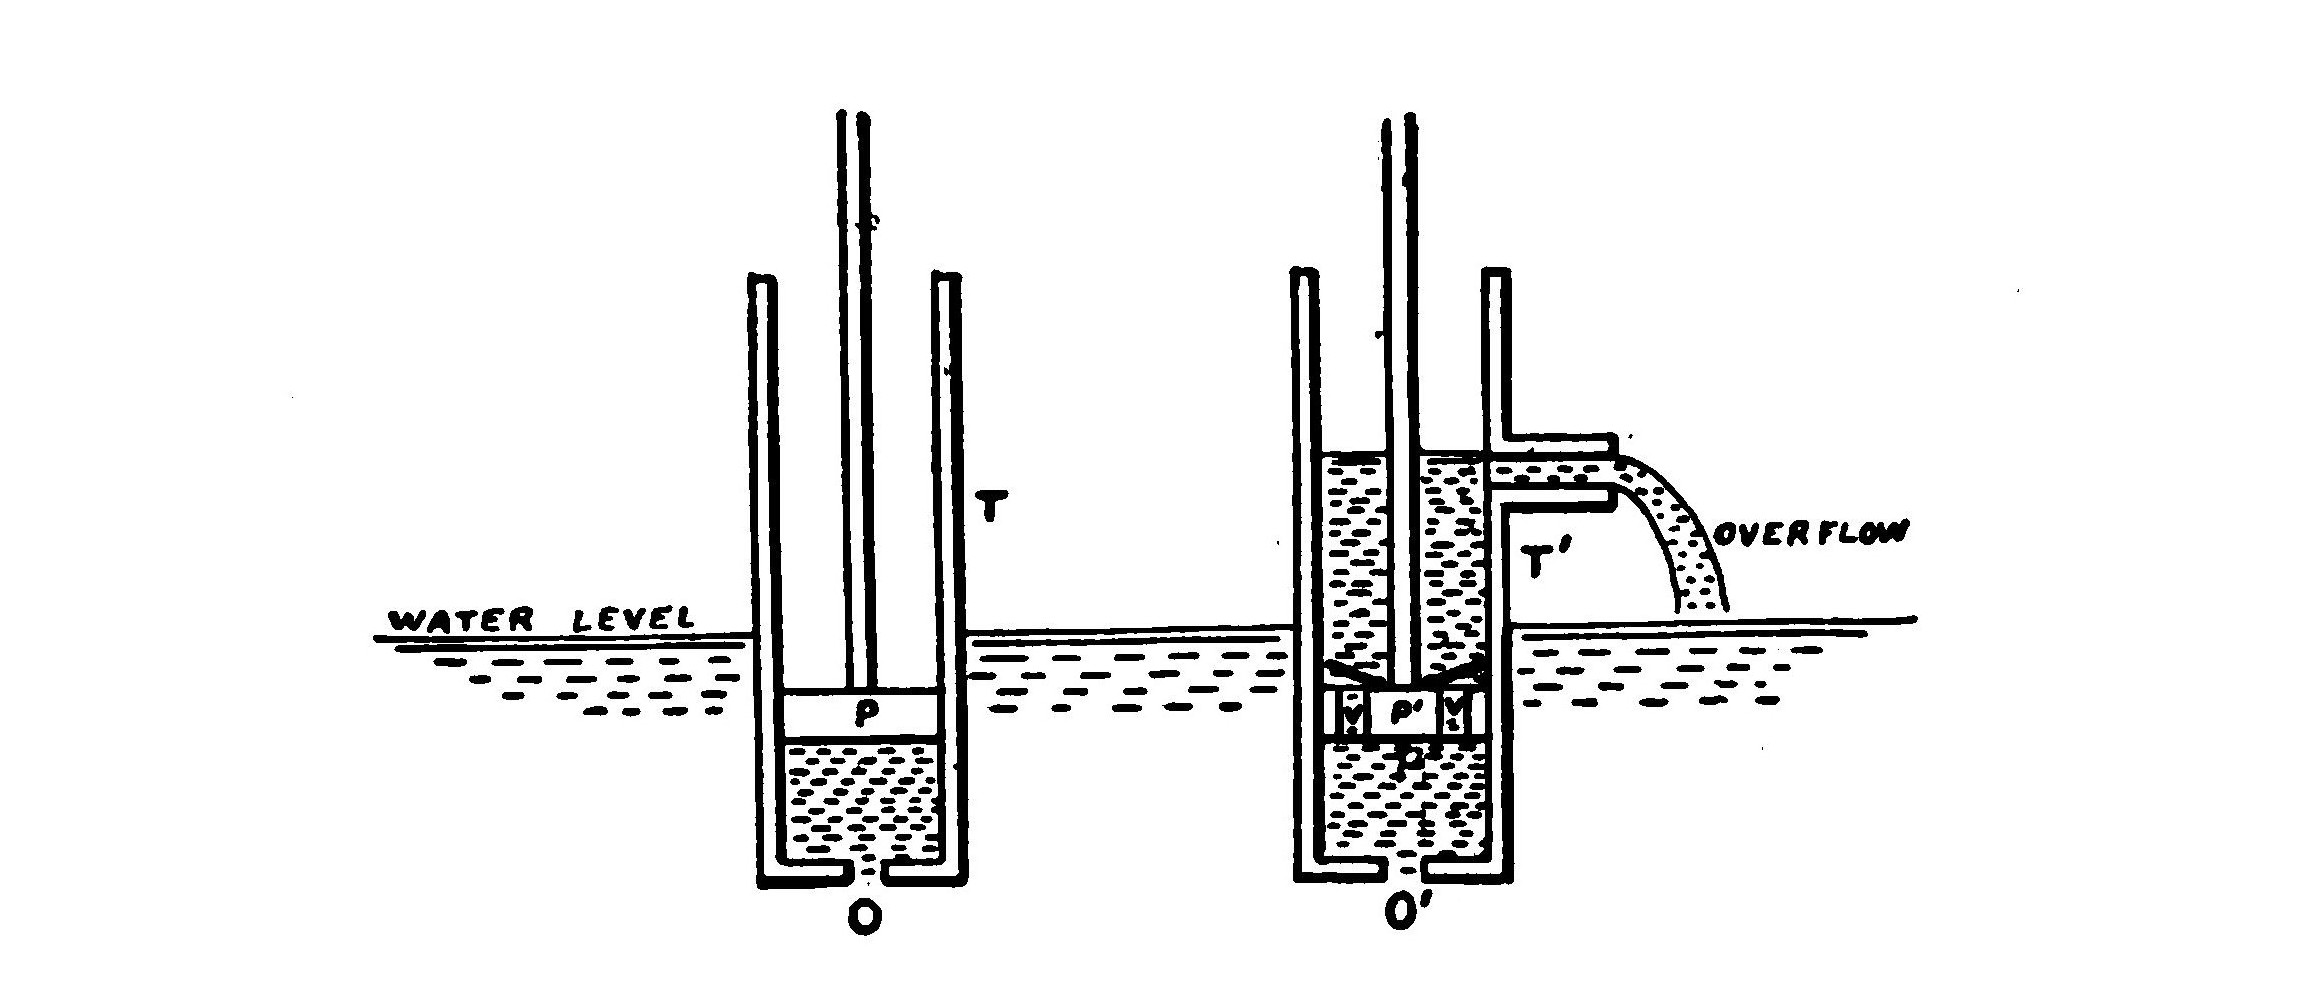 FIG. 68.—Diagram drawing analogy between rectifying action of a detector and a pump.